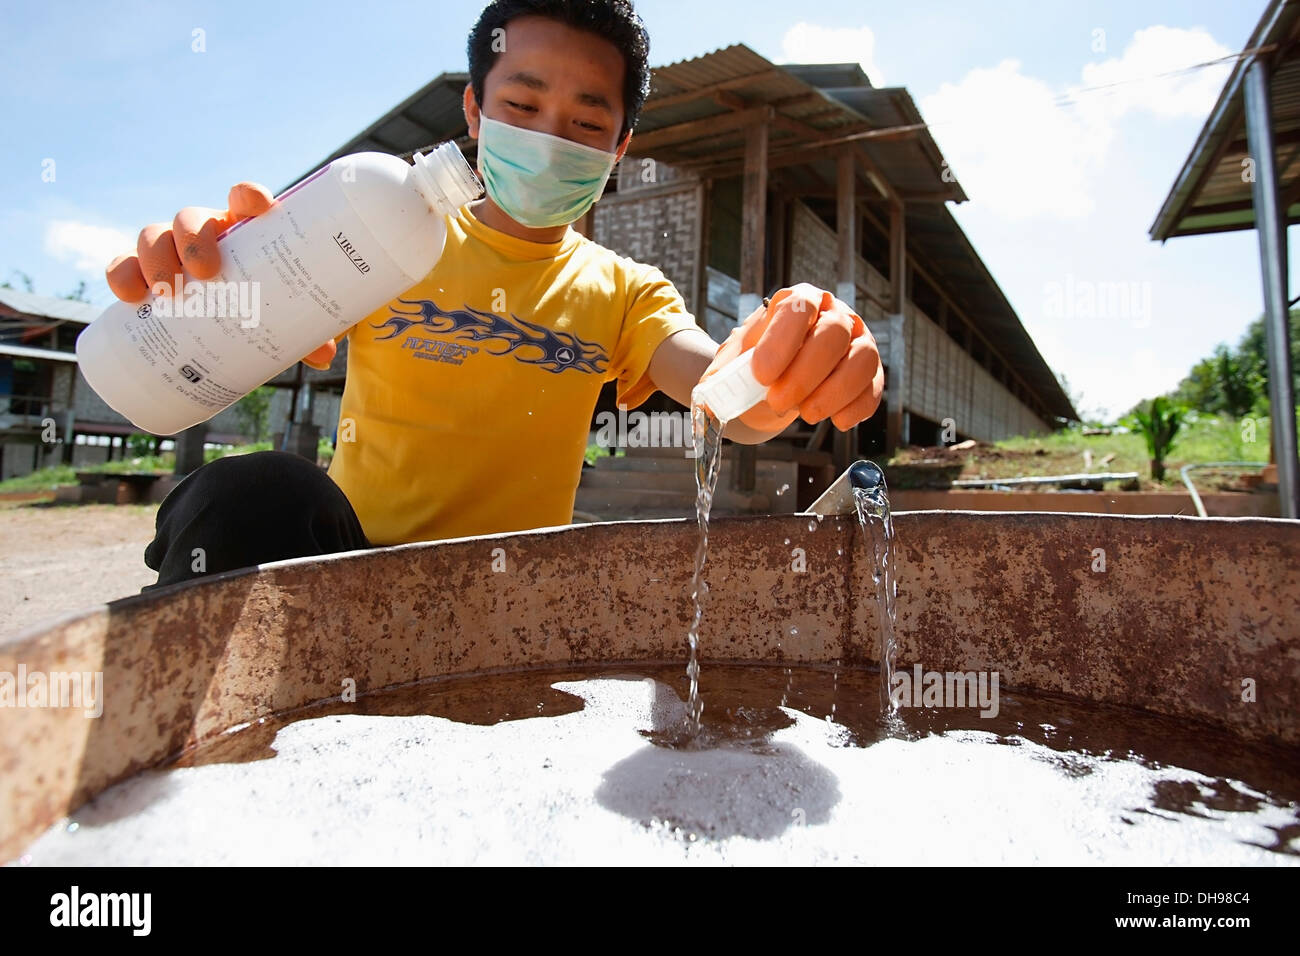 Farmers In Bago During An Outbreak Of Bird Flu Or H5N1, Cleaning And Disinfecting Equipment; Yangon, Burma Stock Photo